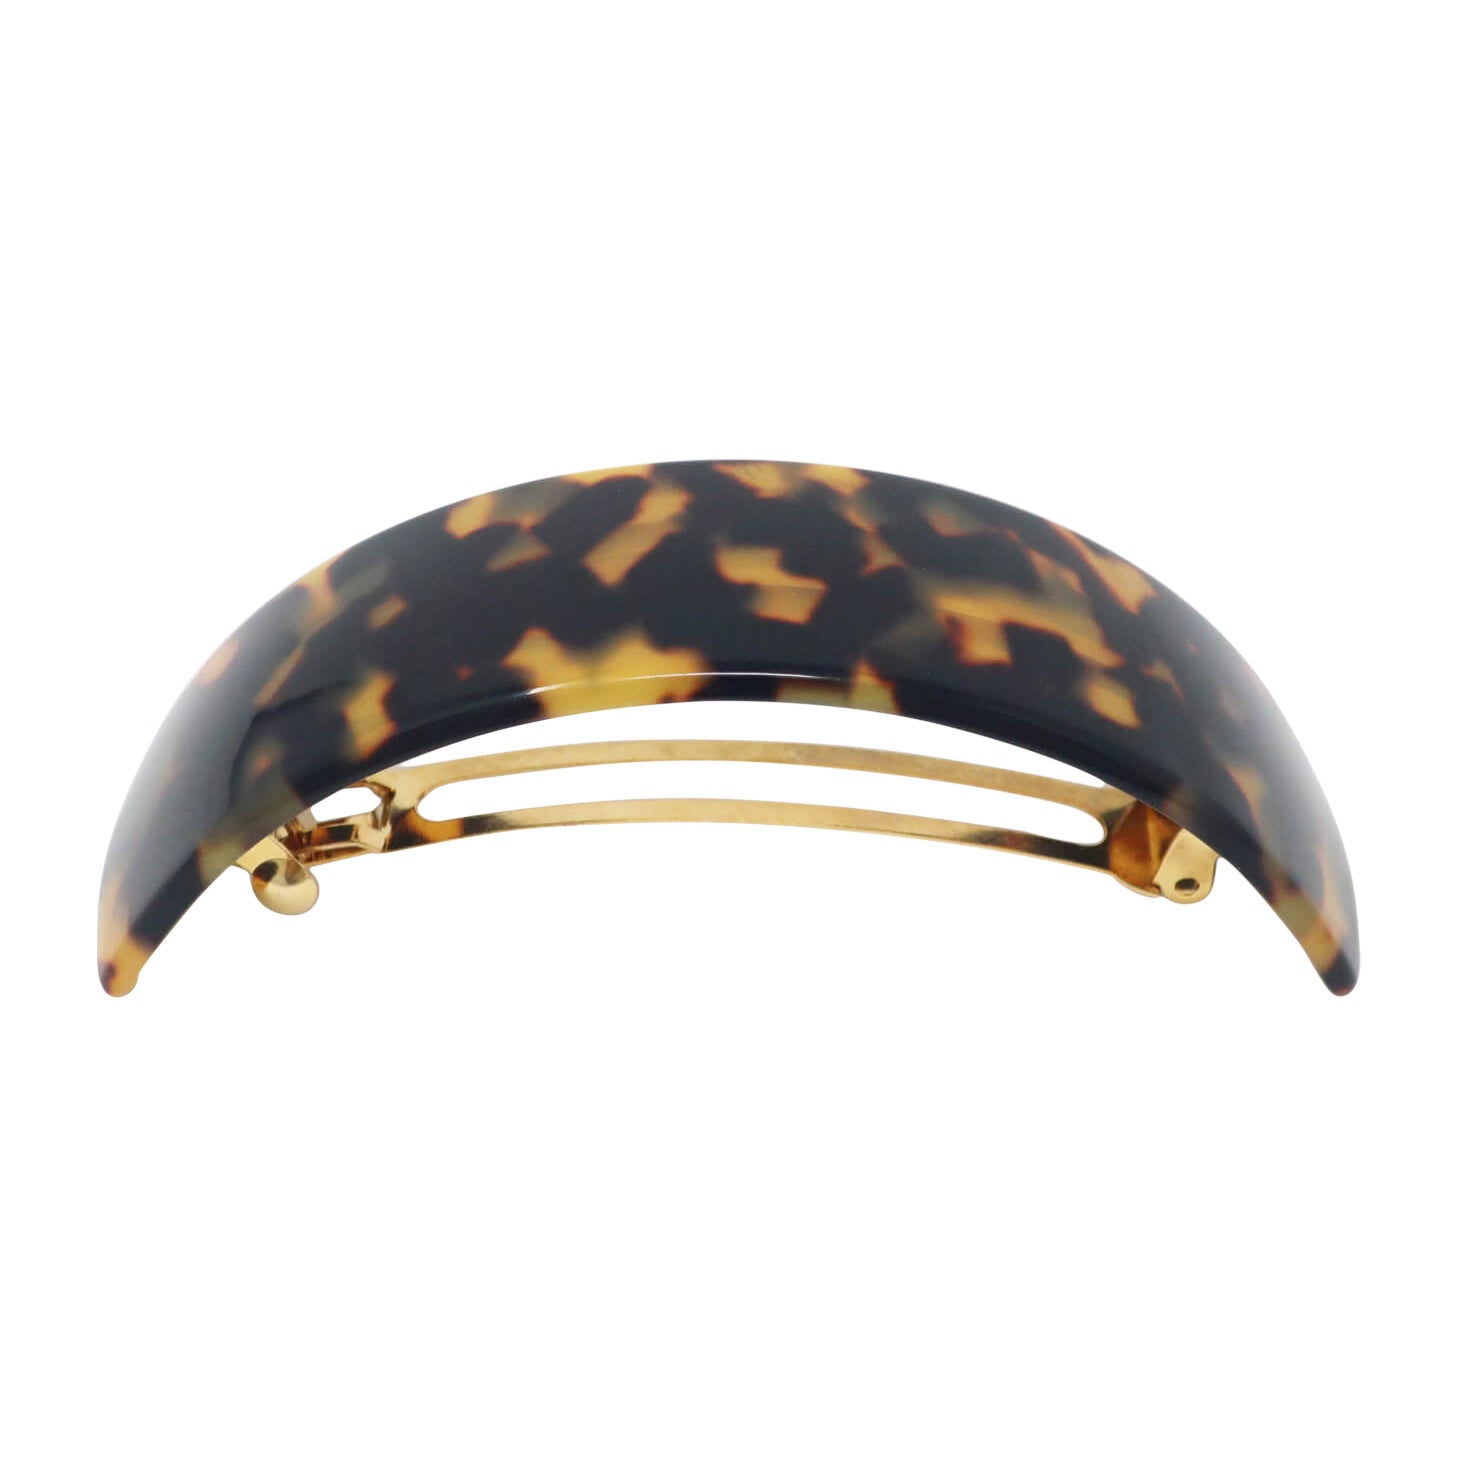 France Luxe Extra Volume Hair Barrette Clip in Tokyo